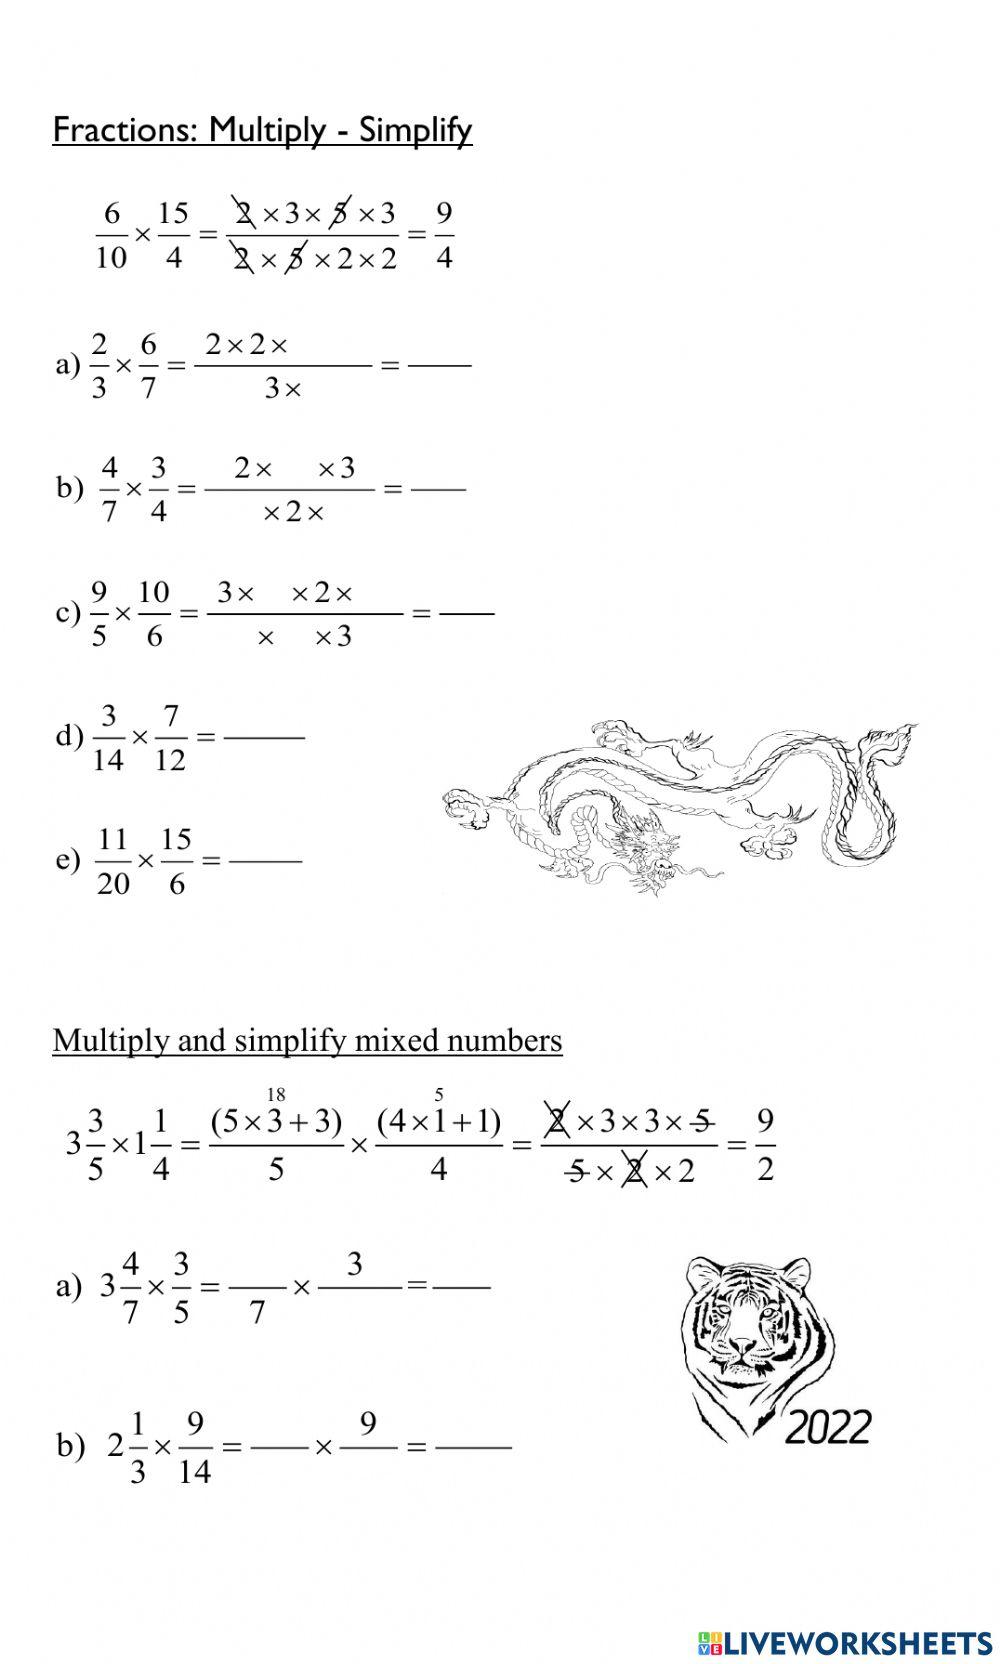 Fractions: Multiply and simplify 02